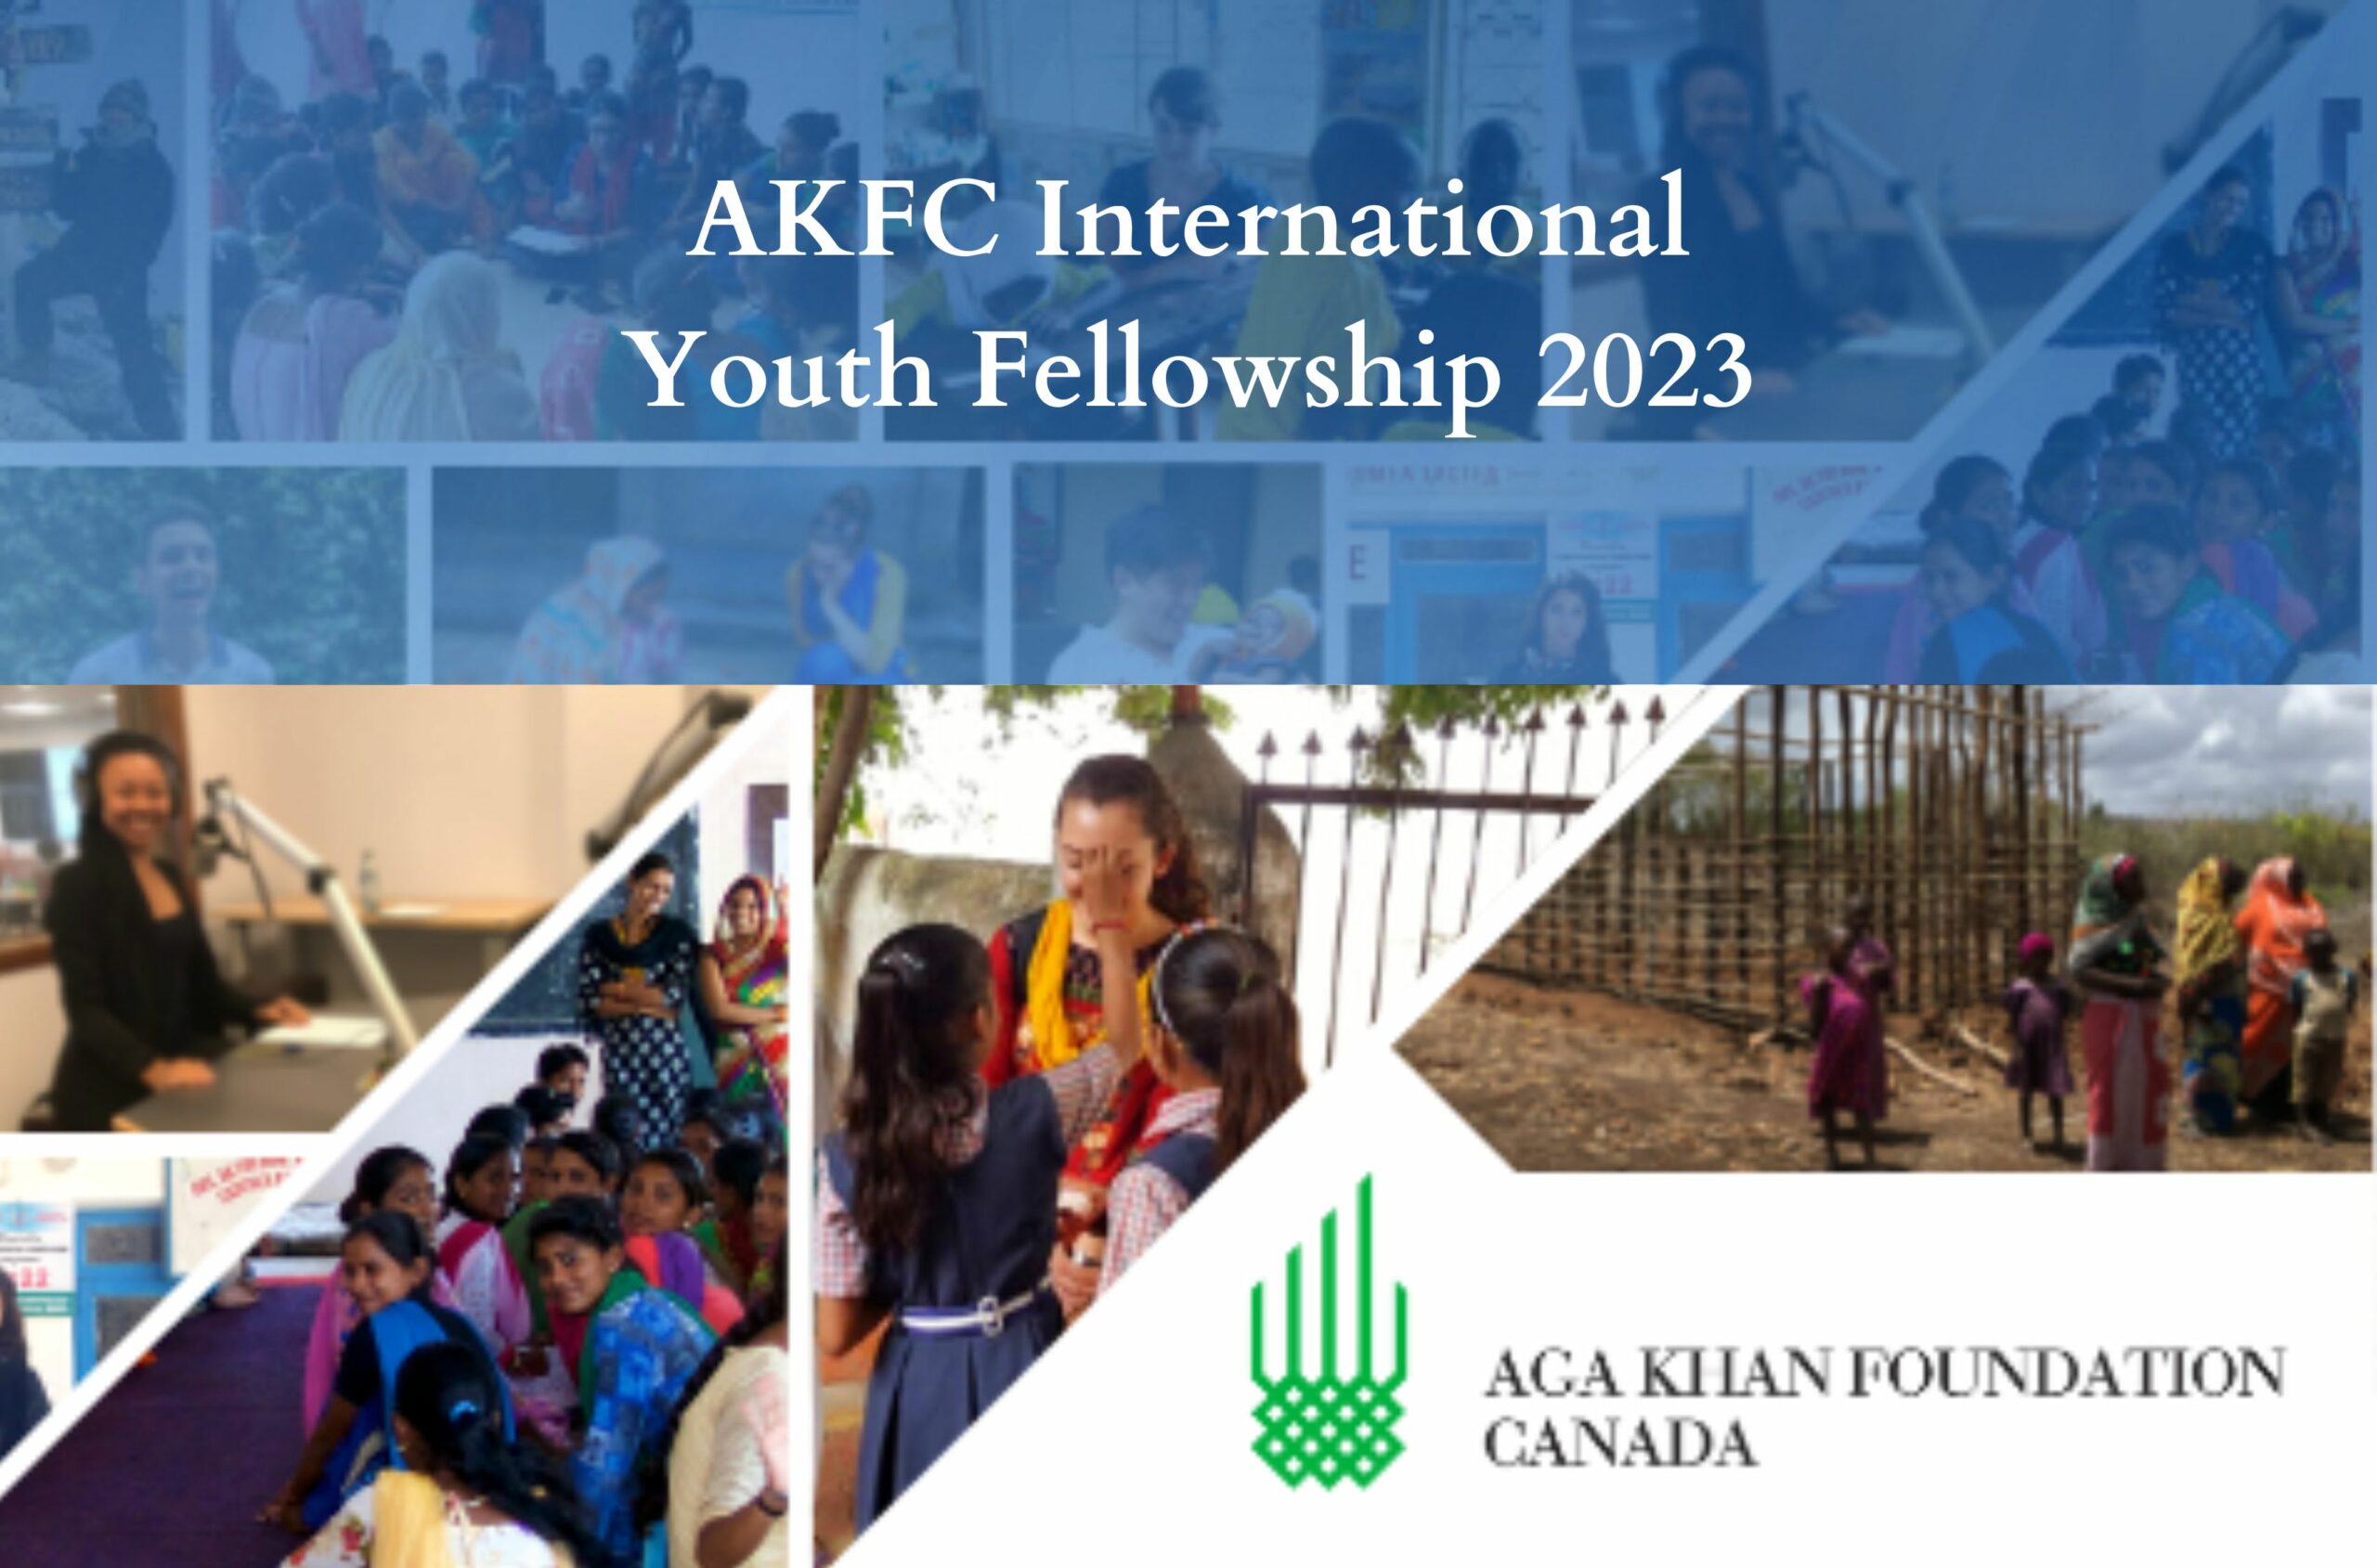 AKFC International Youth Fellowship 2023 Youth Opportunities